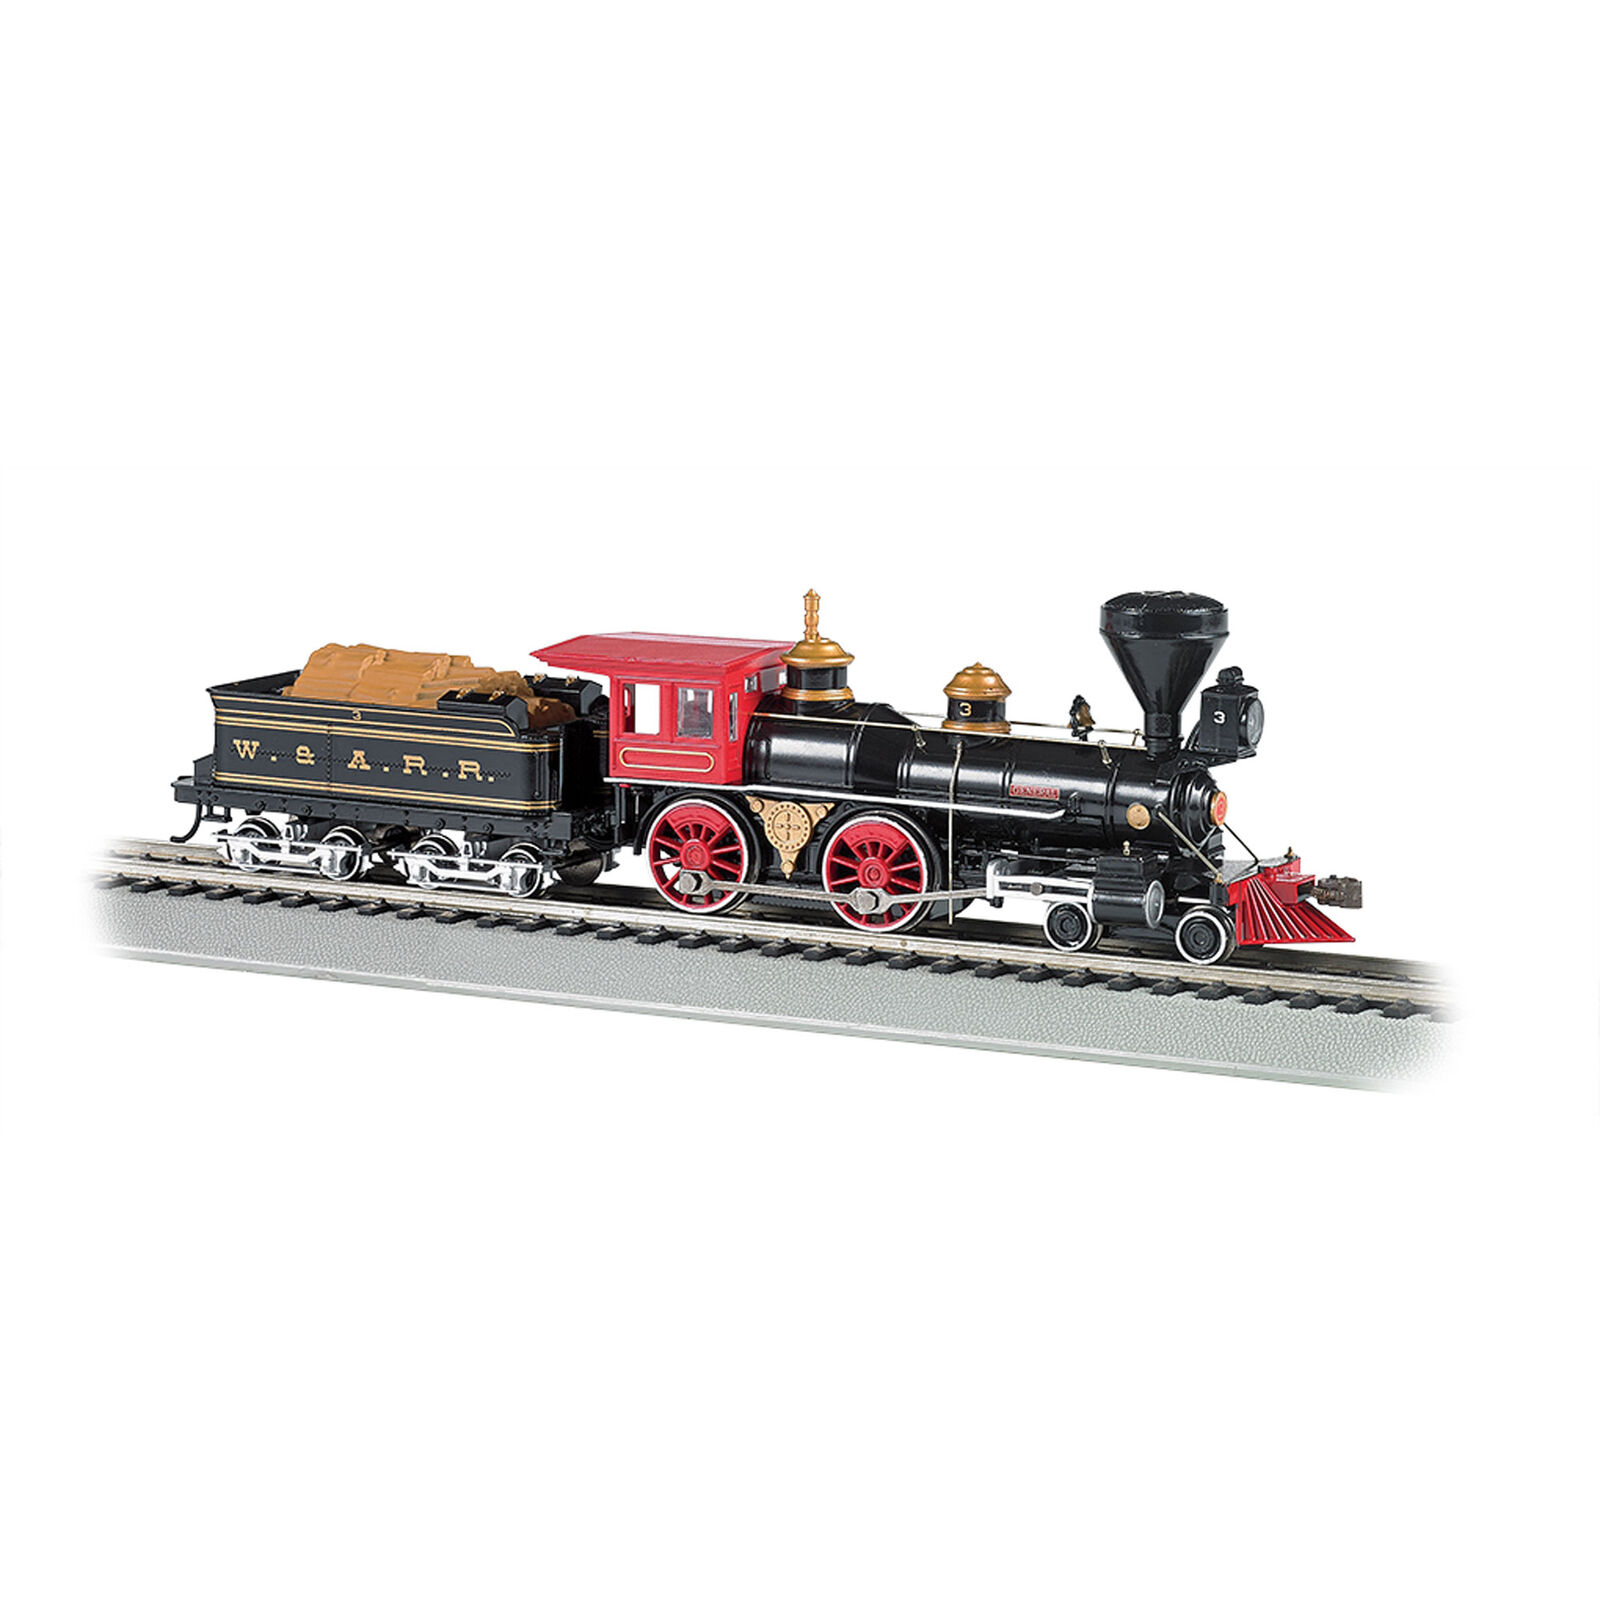 HO 4-4-0 w DCC & Sound Value W&ARR The General